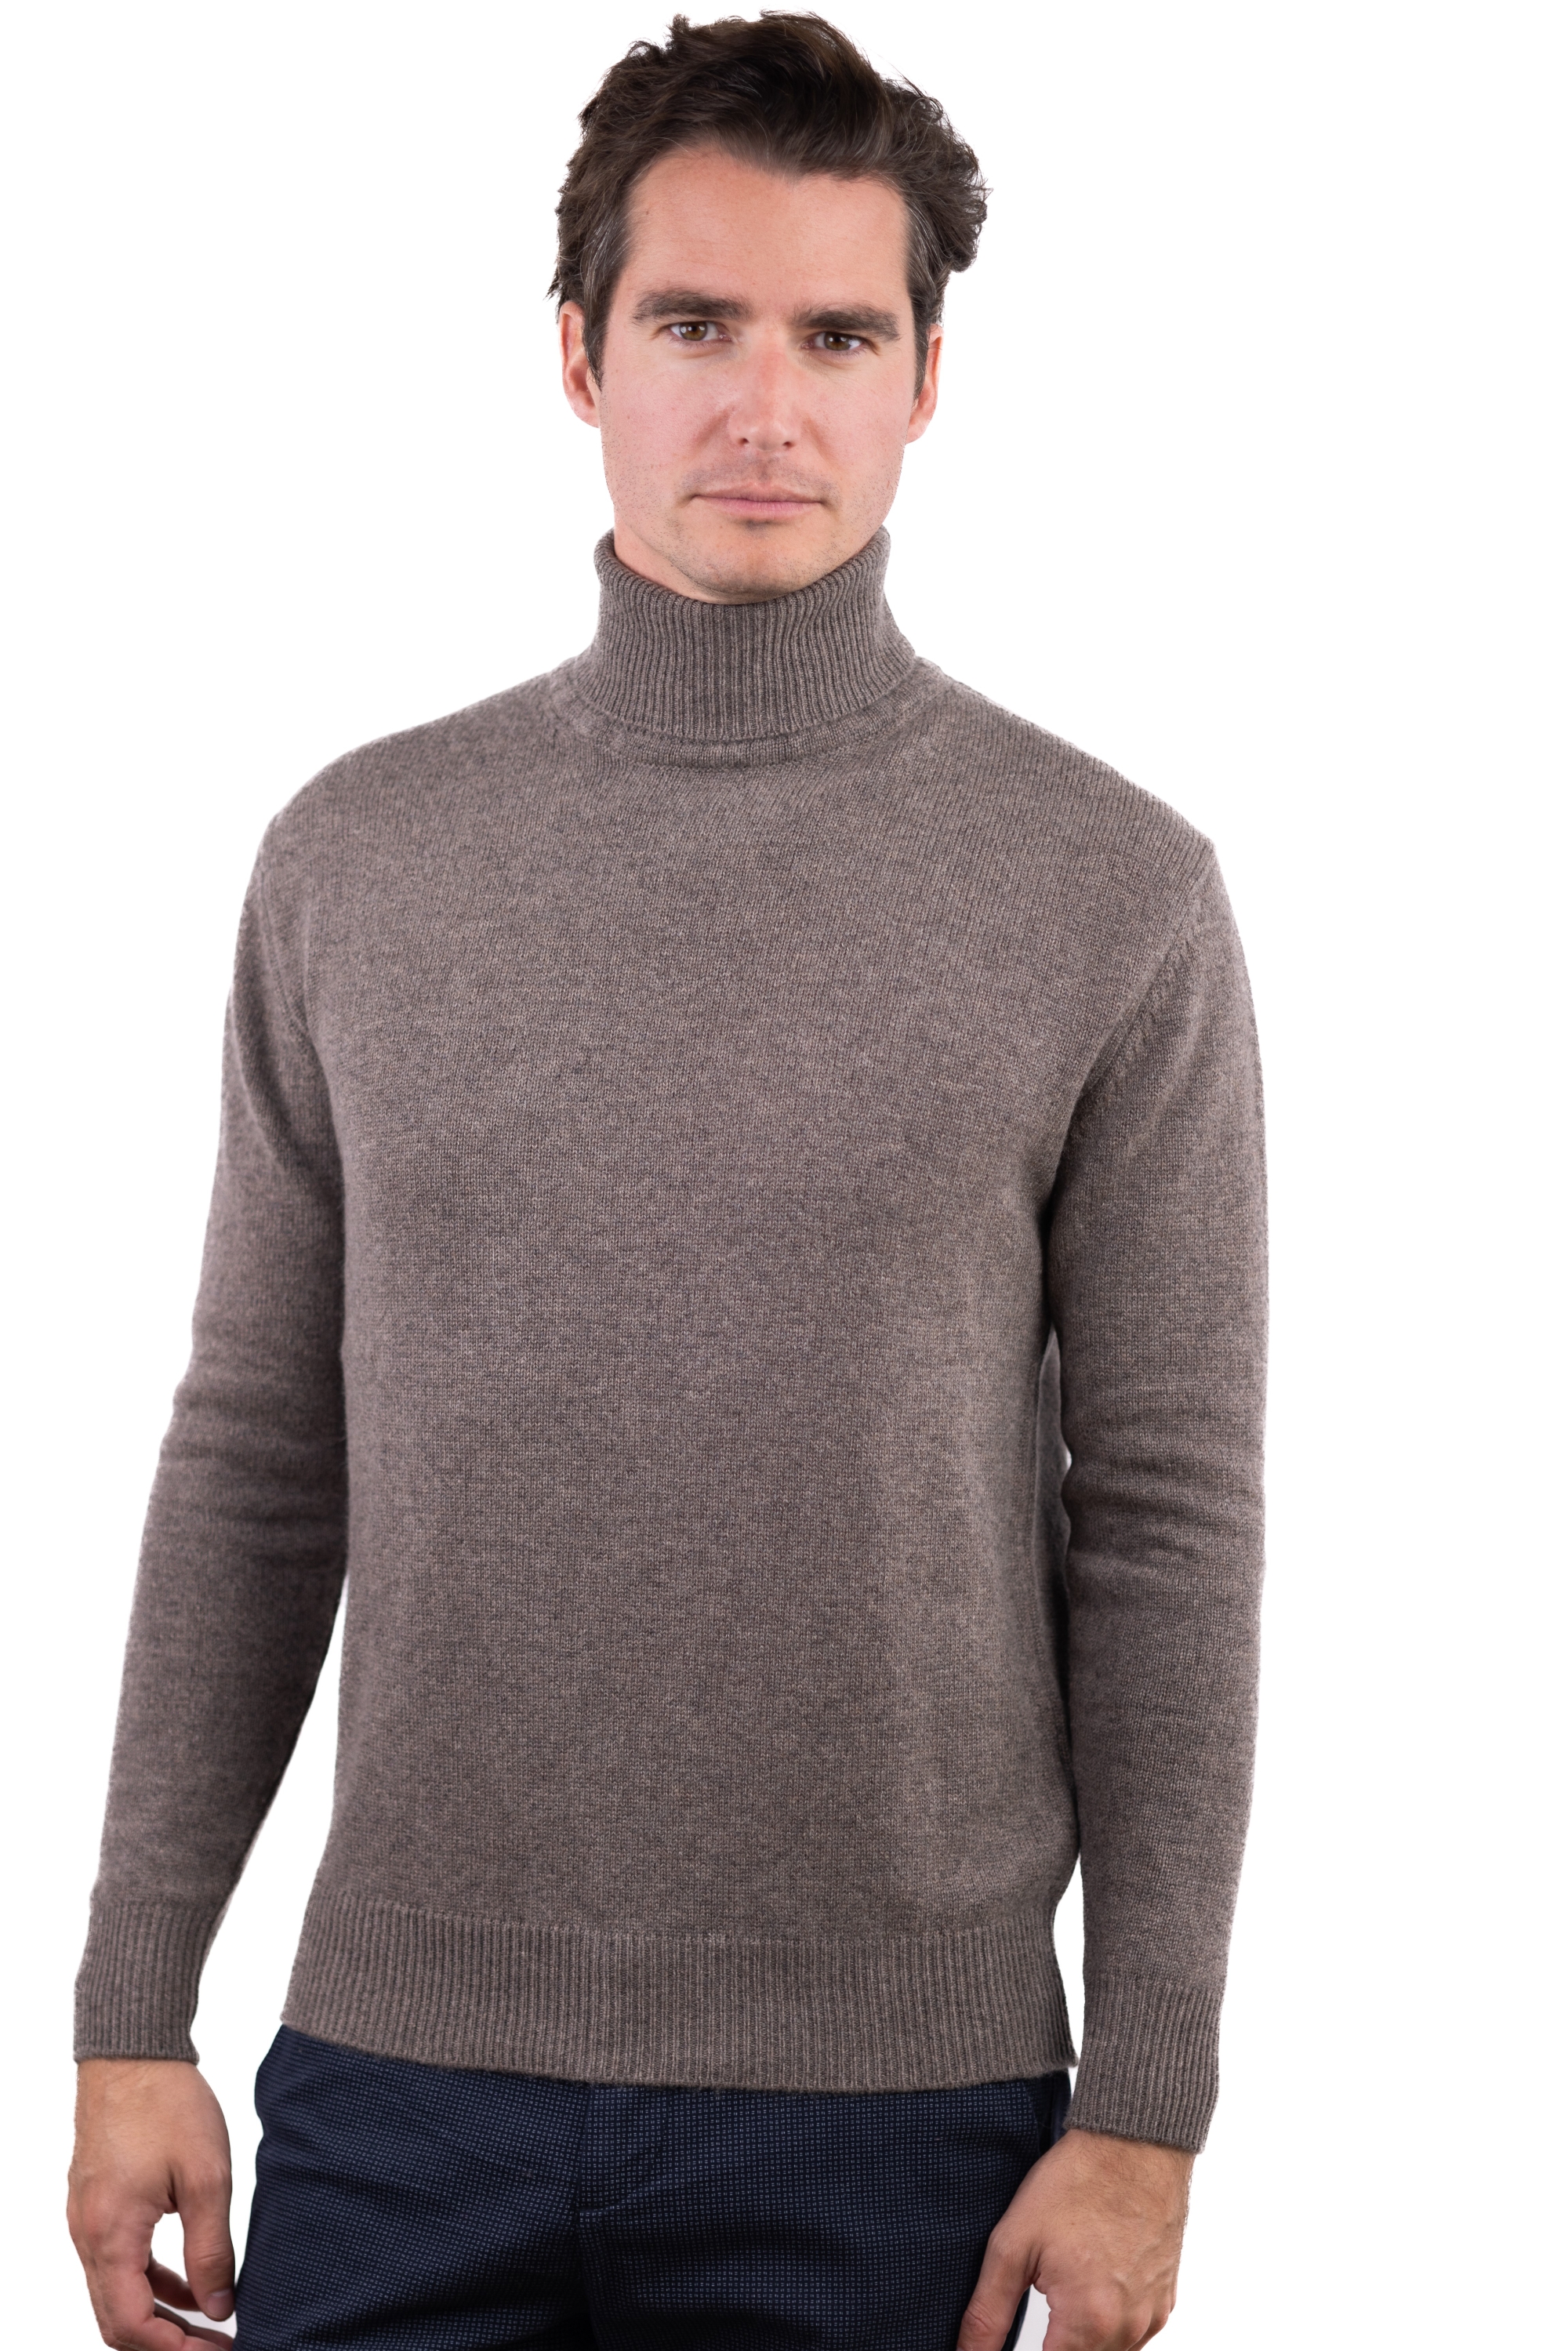 Cashmere men basic sweaters at low prices torino first otter 2xl